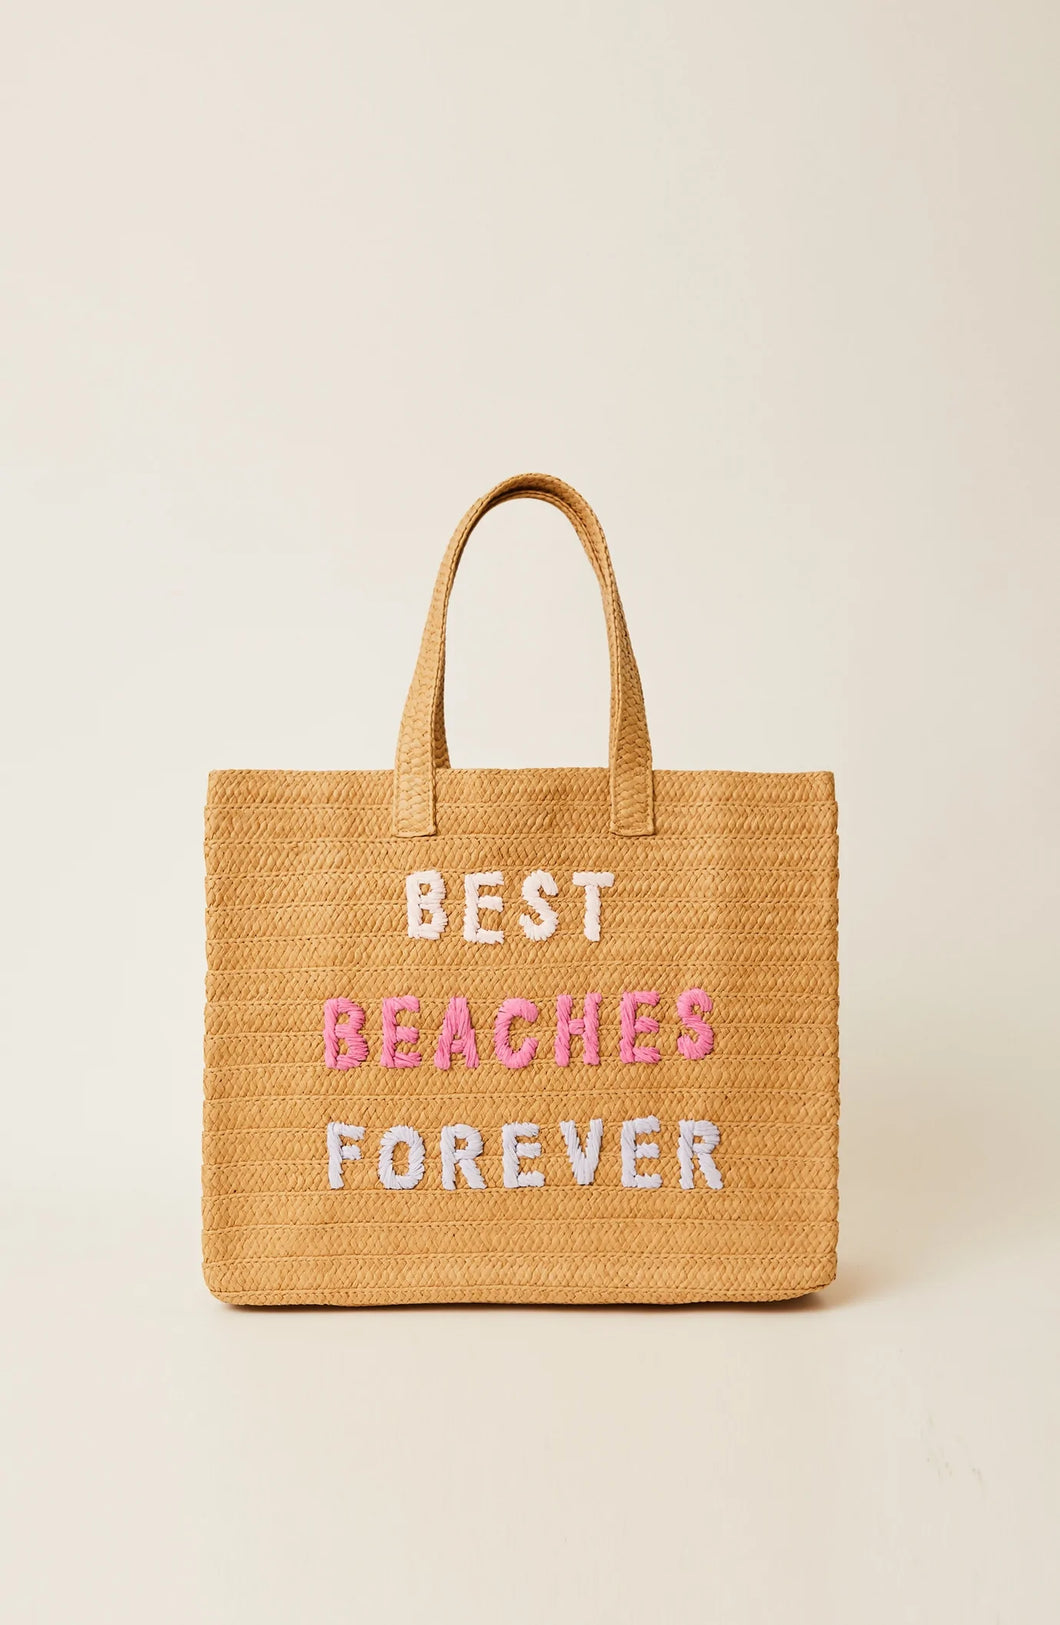 Best Beaches Forever Tote